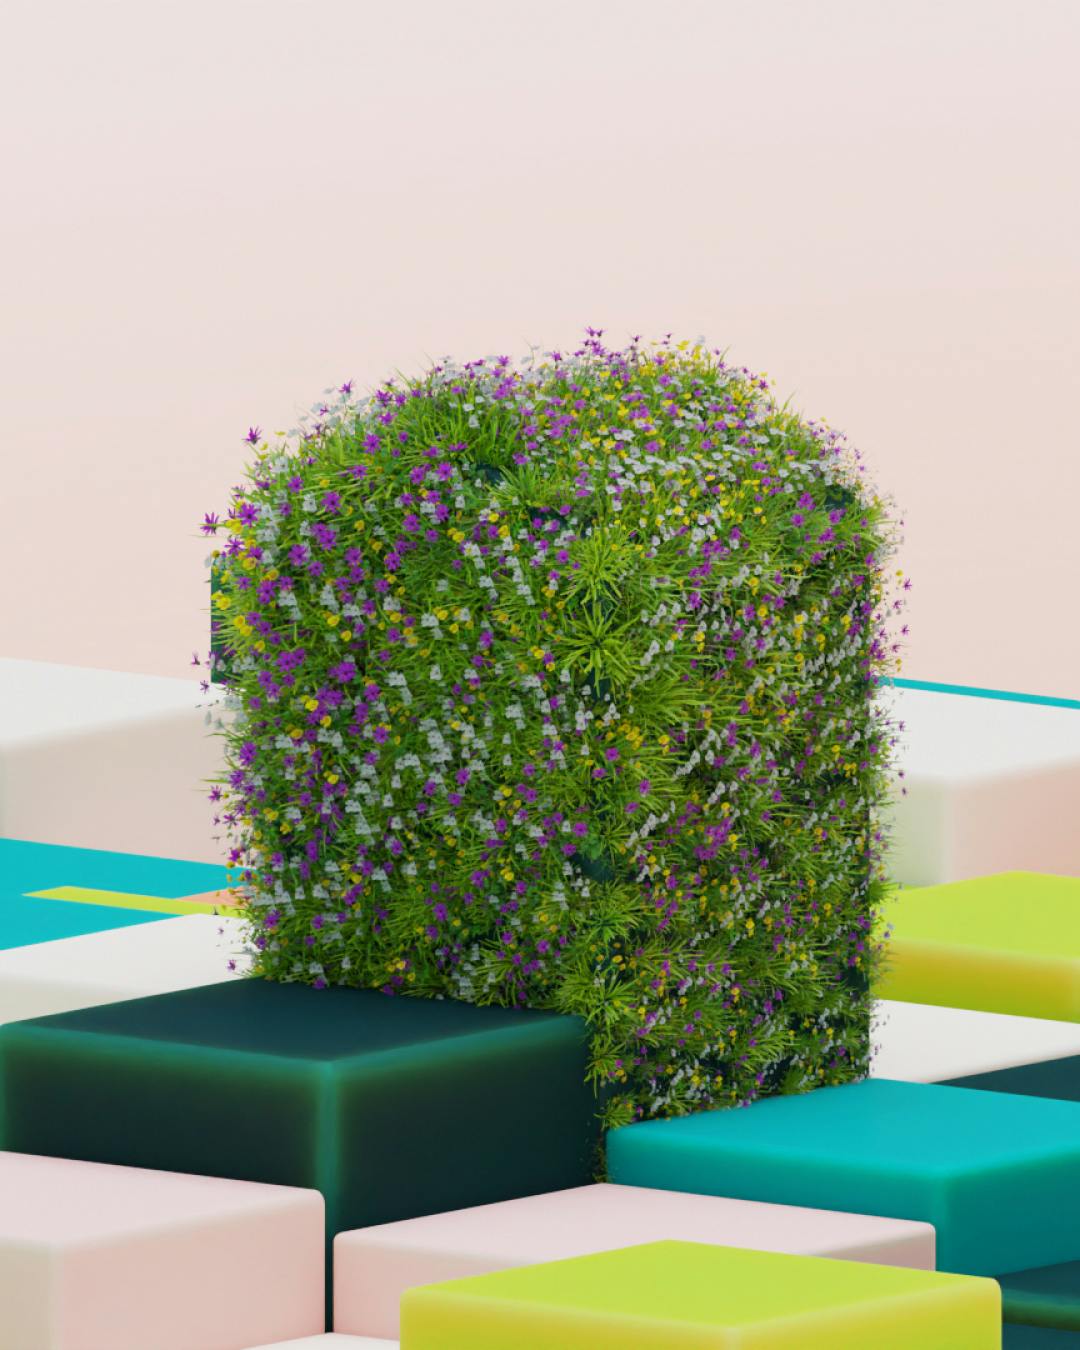 &why: abstract 3D house with grass growing on it